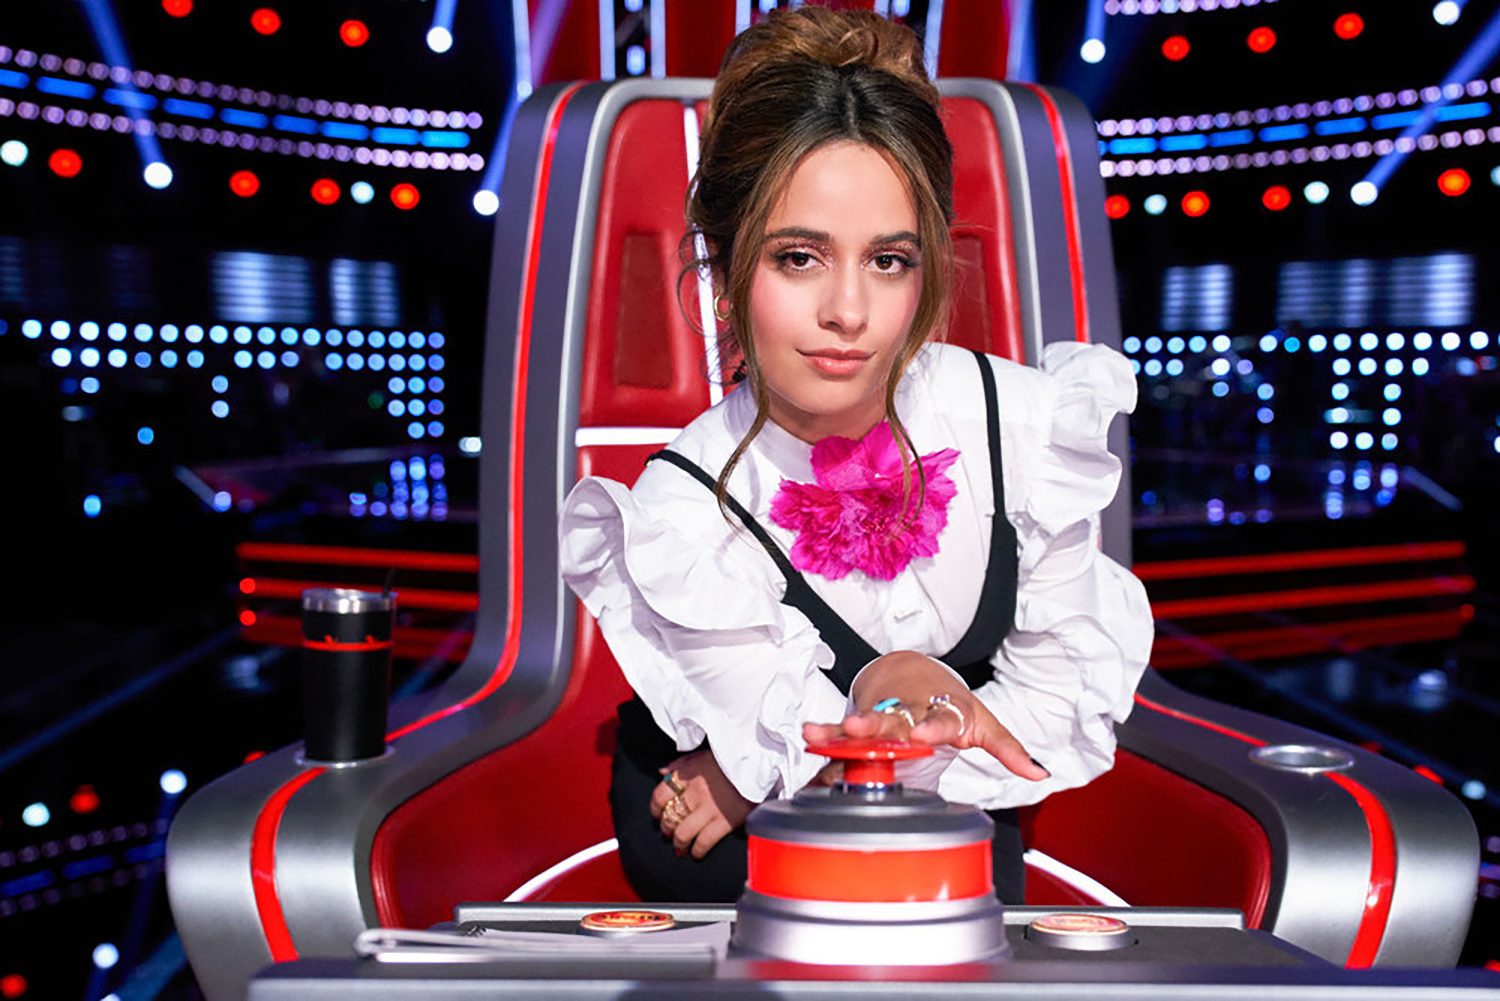 ‘The Voice’: Camila Cabello Has a Game-Changing Idea for a New Button, but It’s Controversial